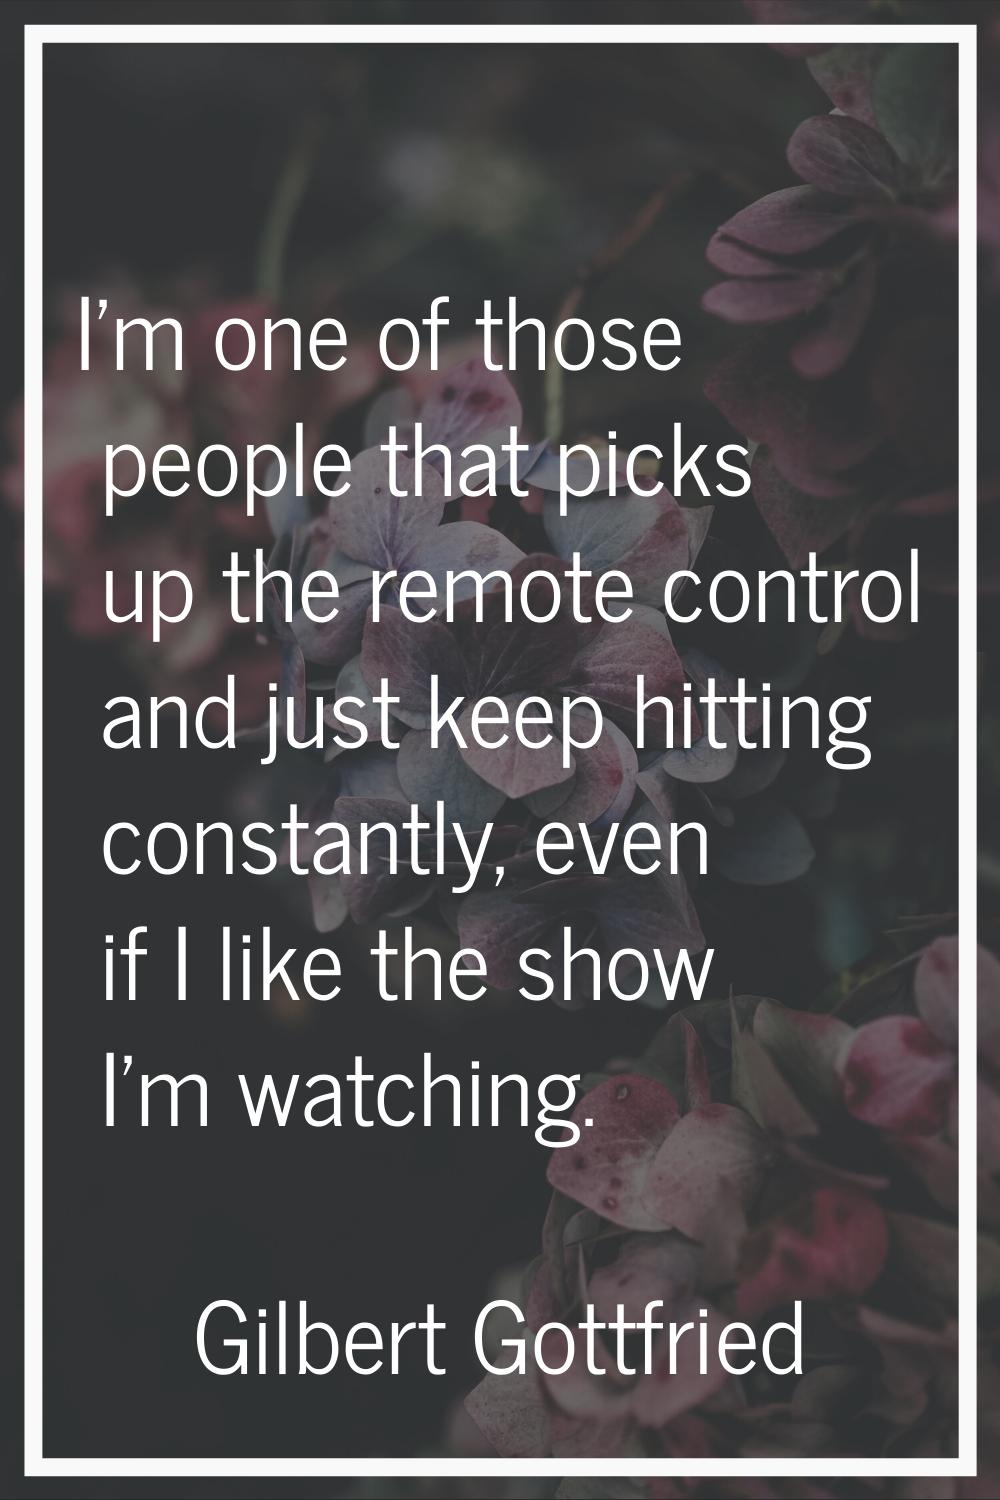 I'm one of those people that picks up the remote control and just keep hitting constantly, even if 